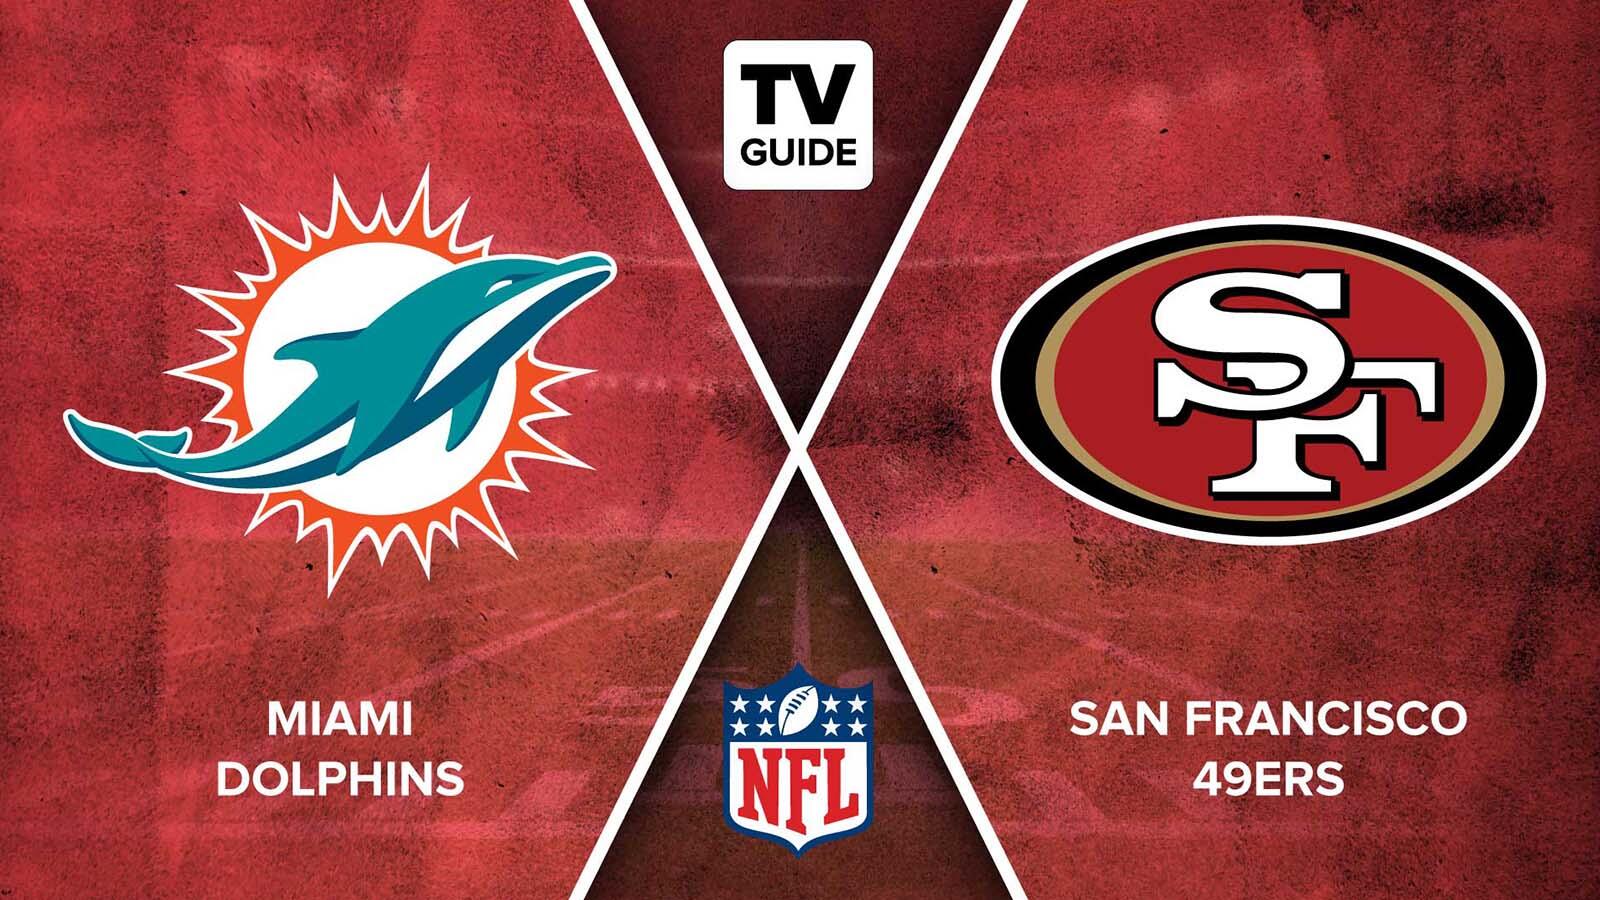 How to Watch Dolphins vs. 49ers Live on 12/04 - TV Guide